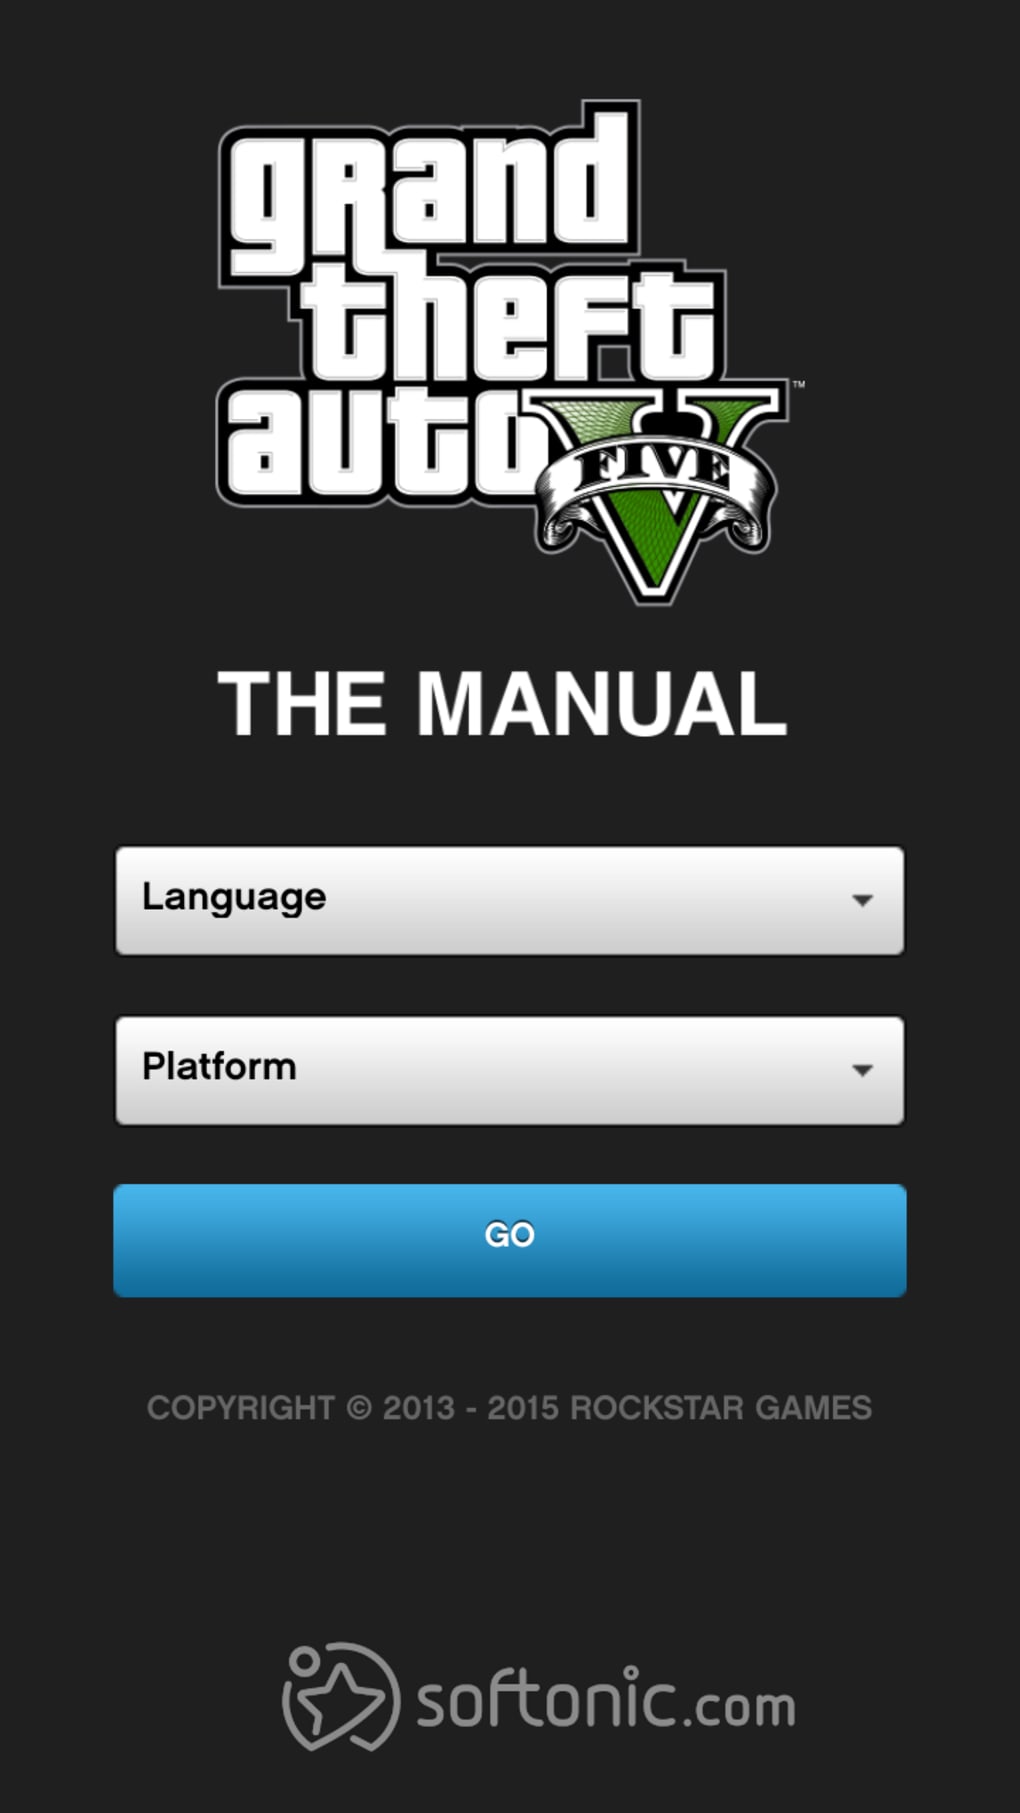 GTA V - Grand Theft Auto V APK 9.0 - Download Free for Android